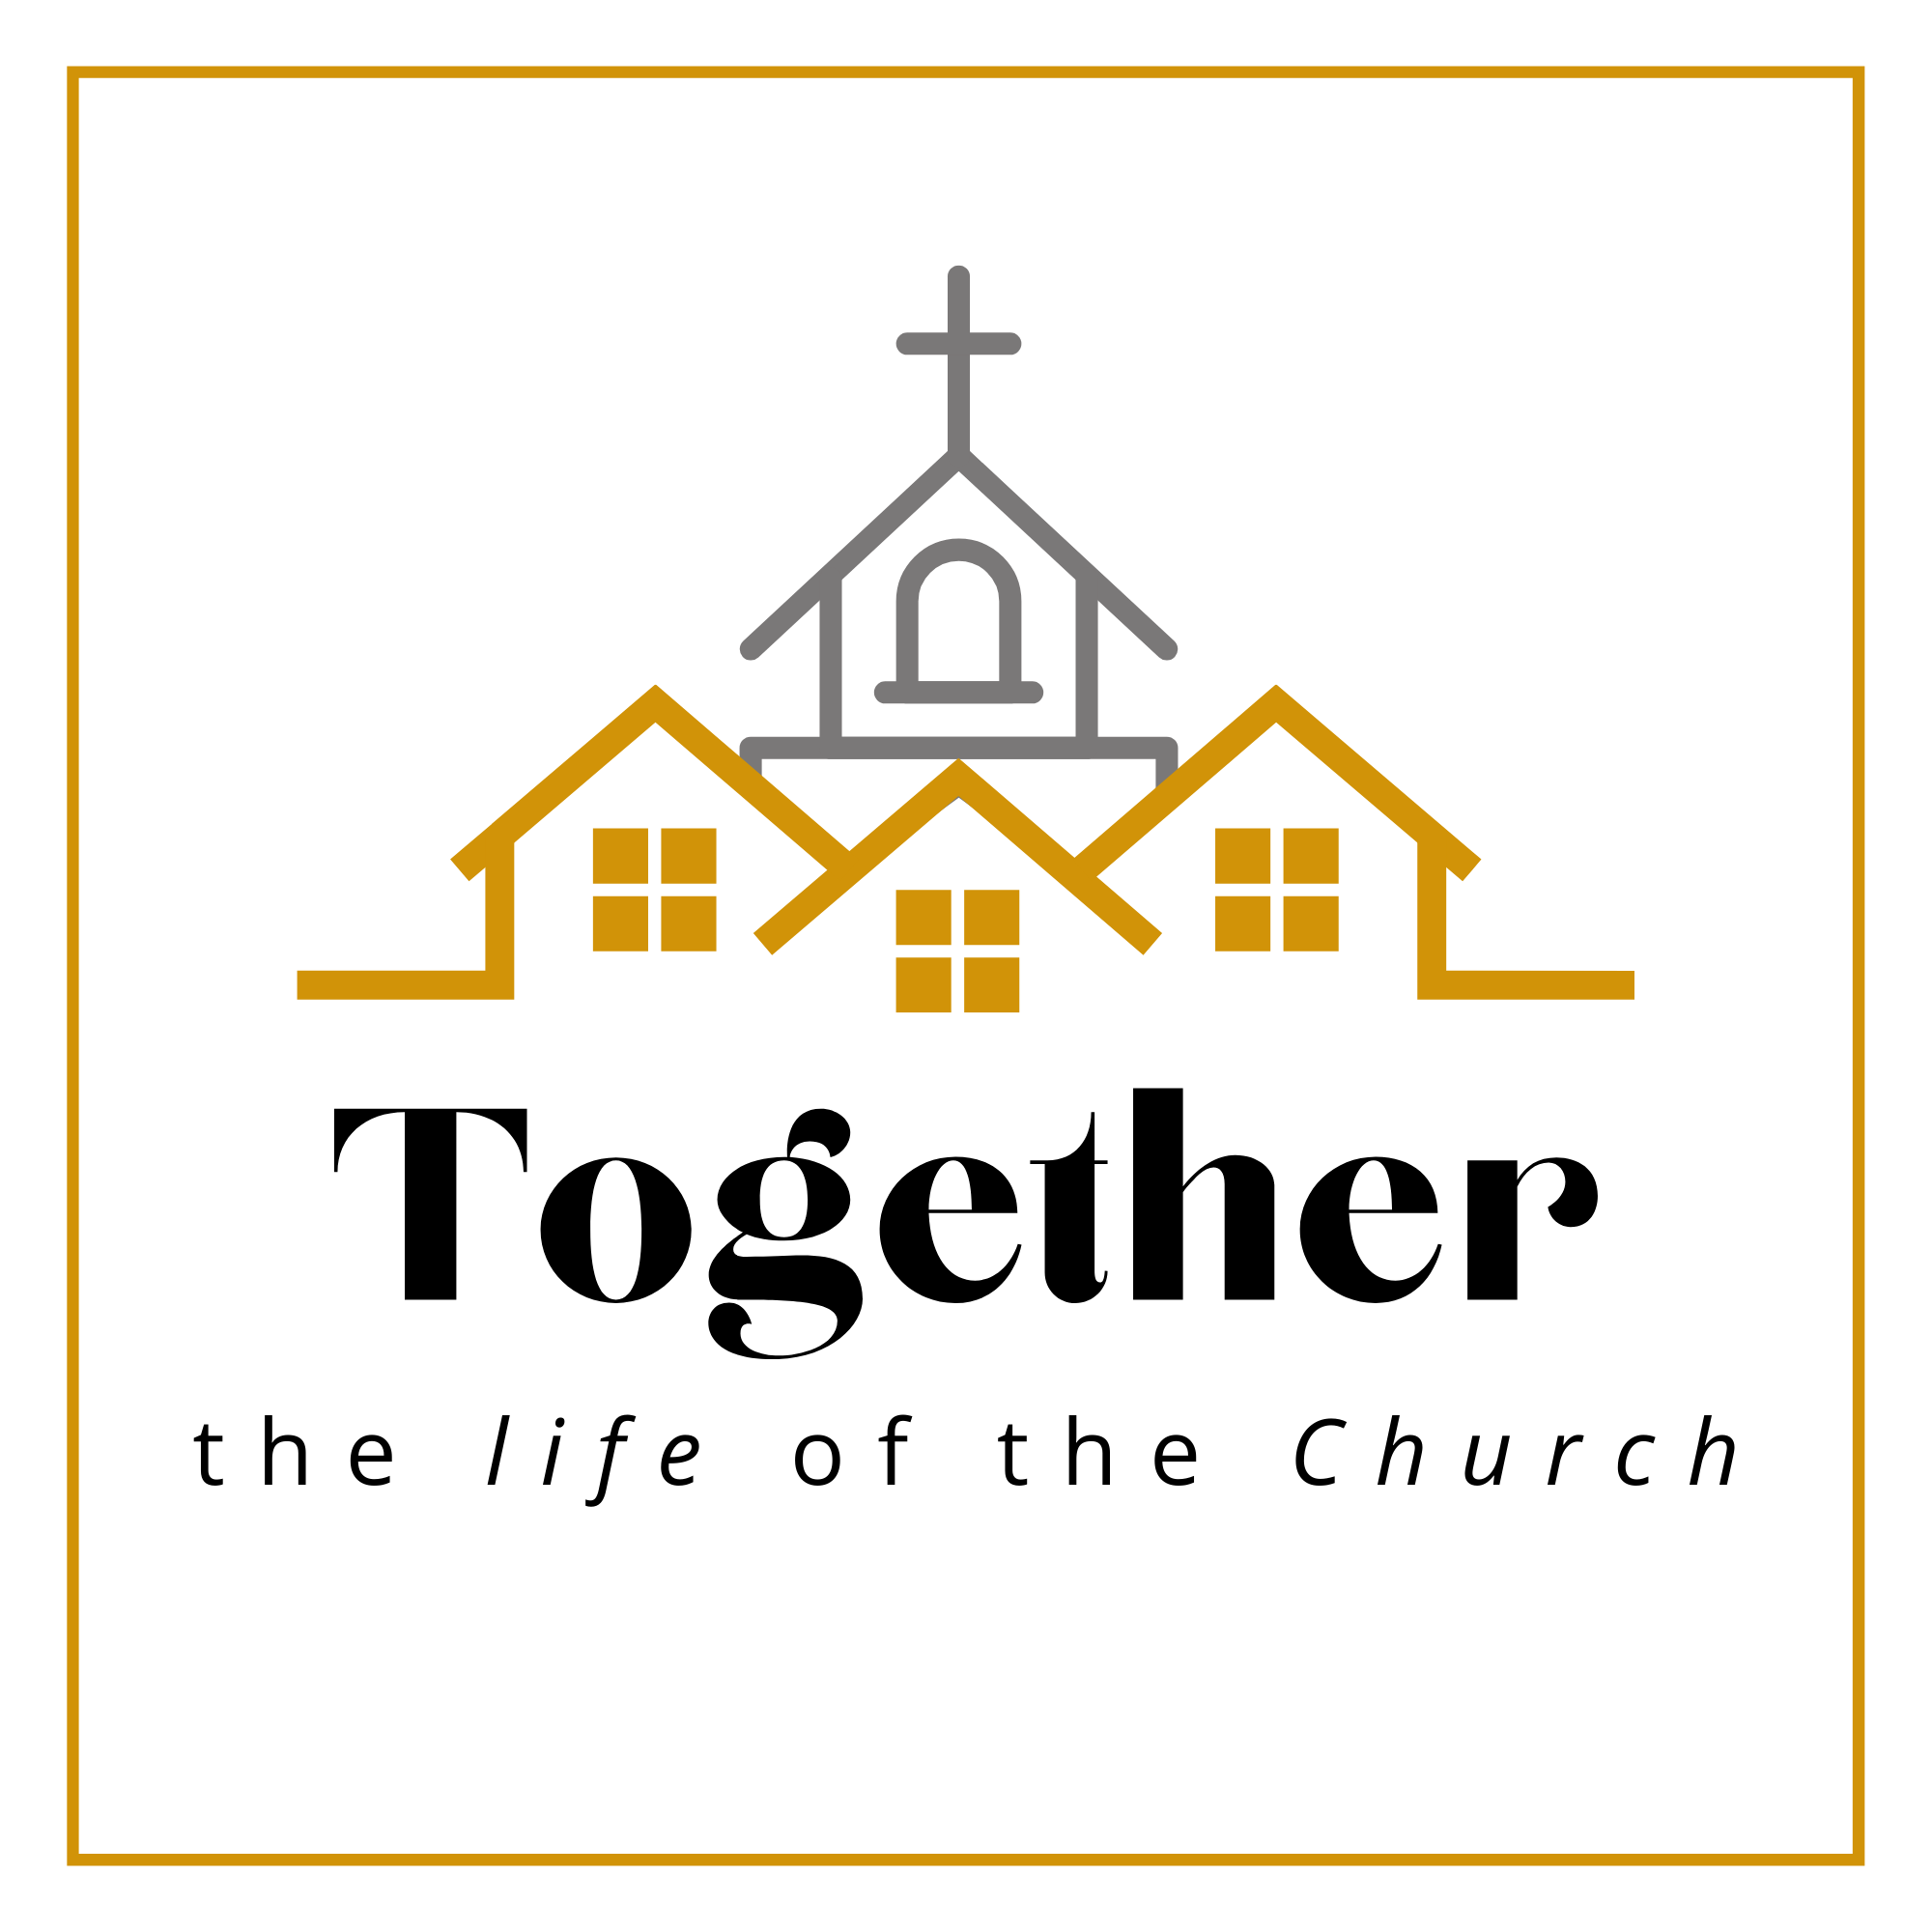 Together: The Life of the Church